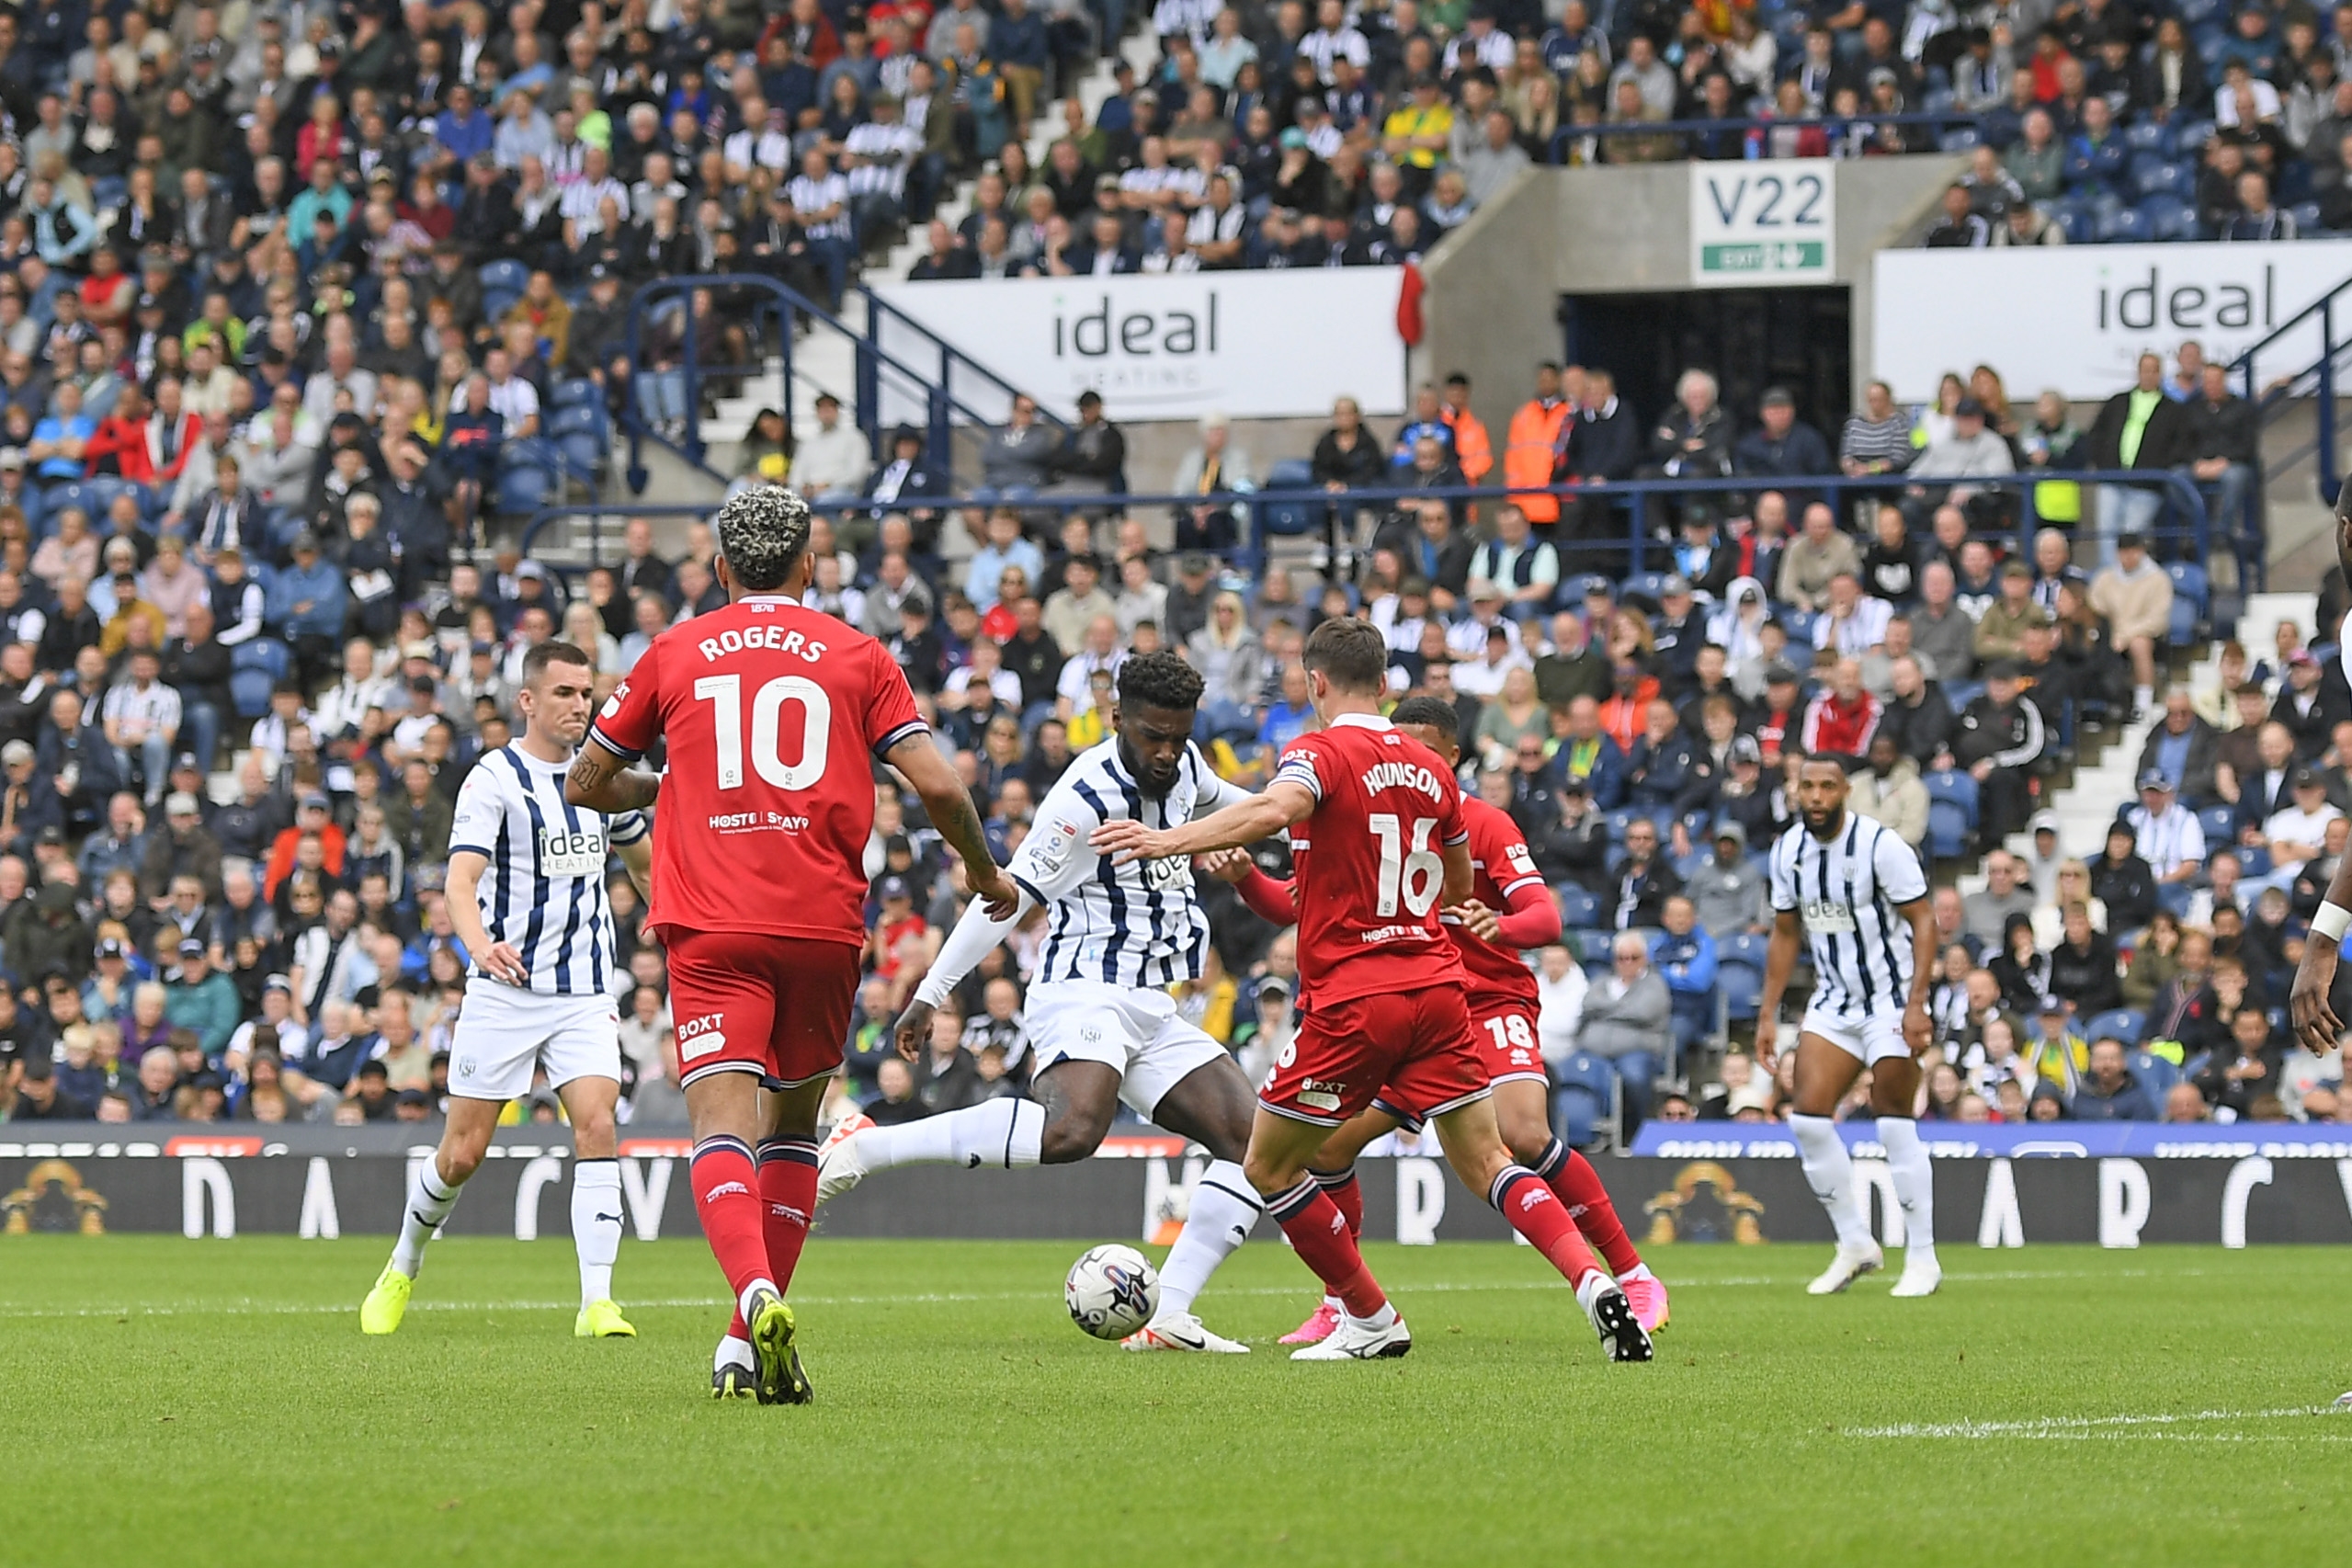 Cedric Kipre shoots at goal against Middlesbrough